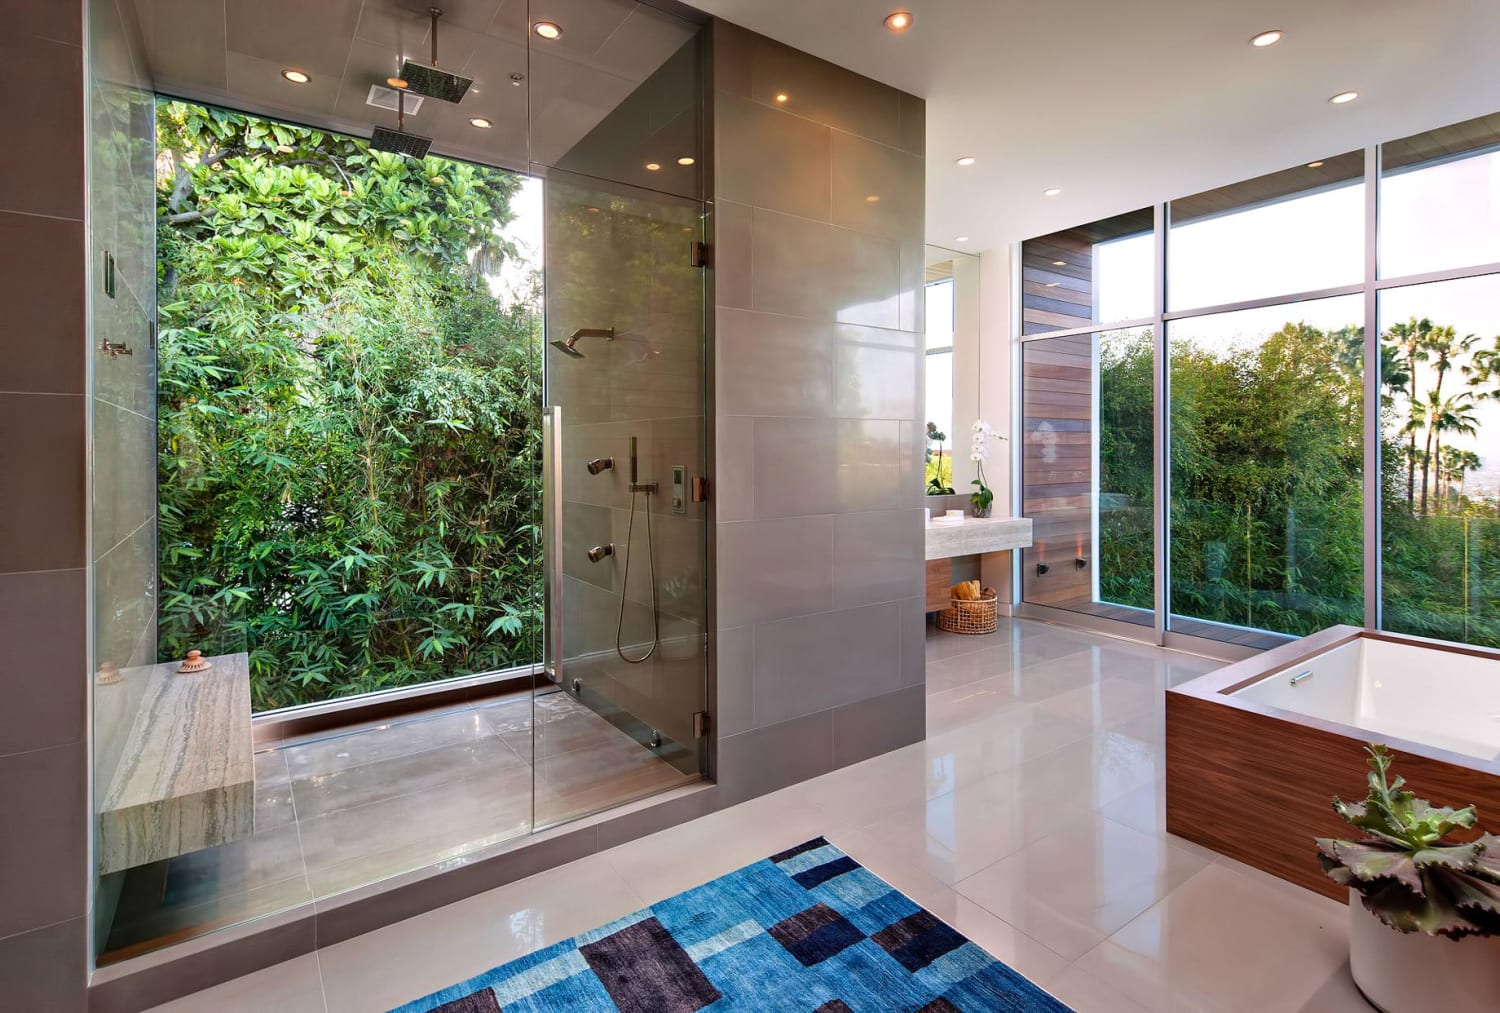 Rain head shower with exterior glass wall to greenbelt plantation - design by Belzberg Architects Group - Los Angeles, California